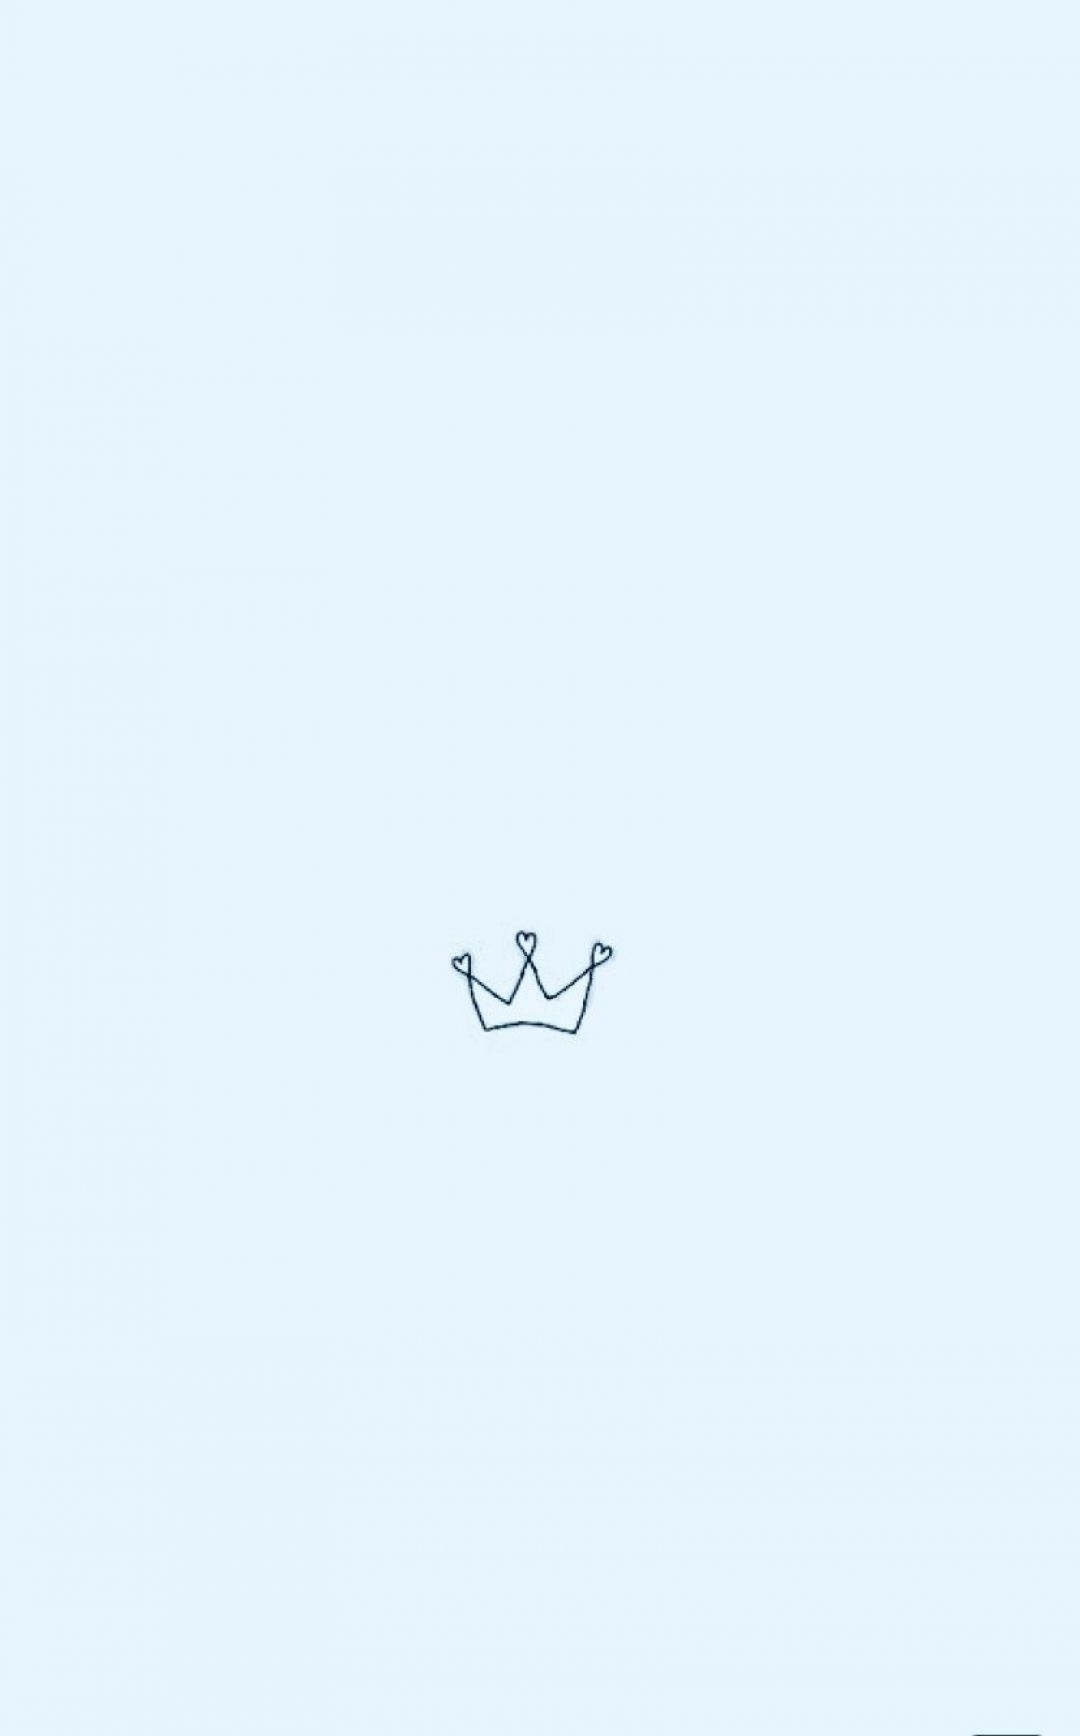 A blue background with the word crown in white - Simple